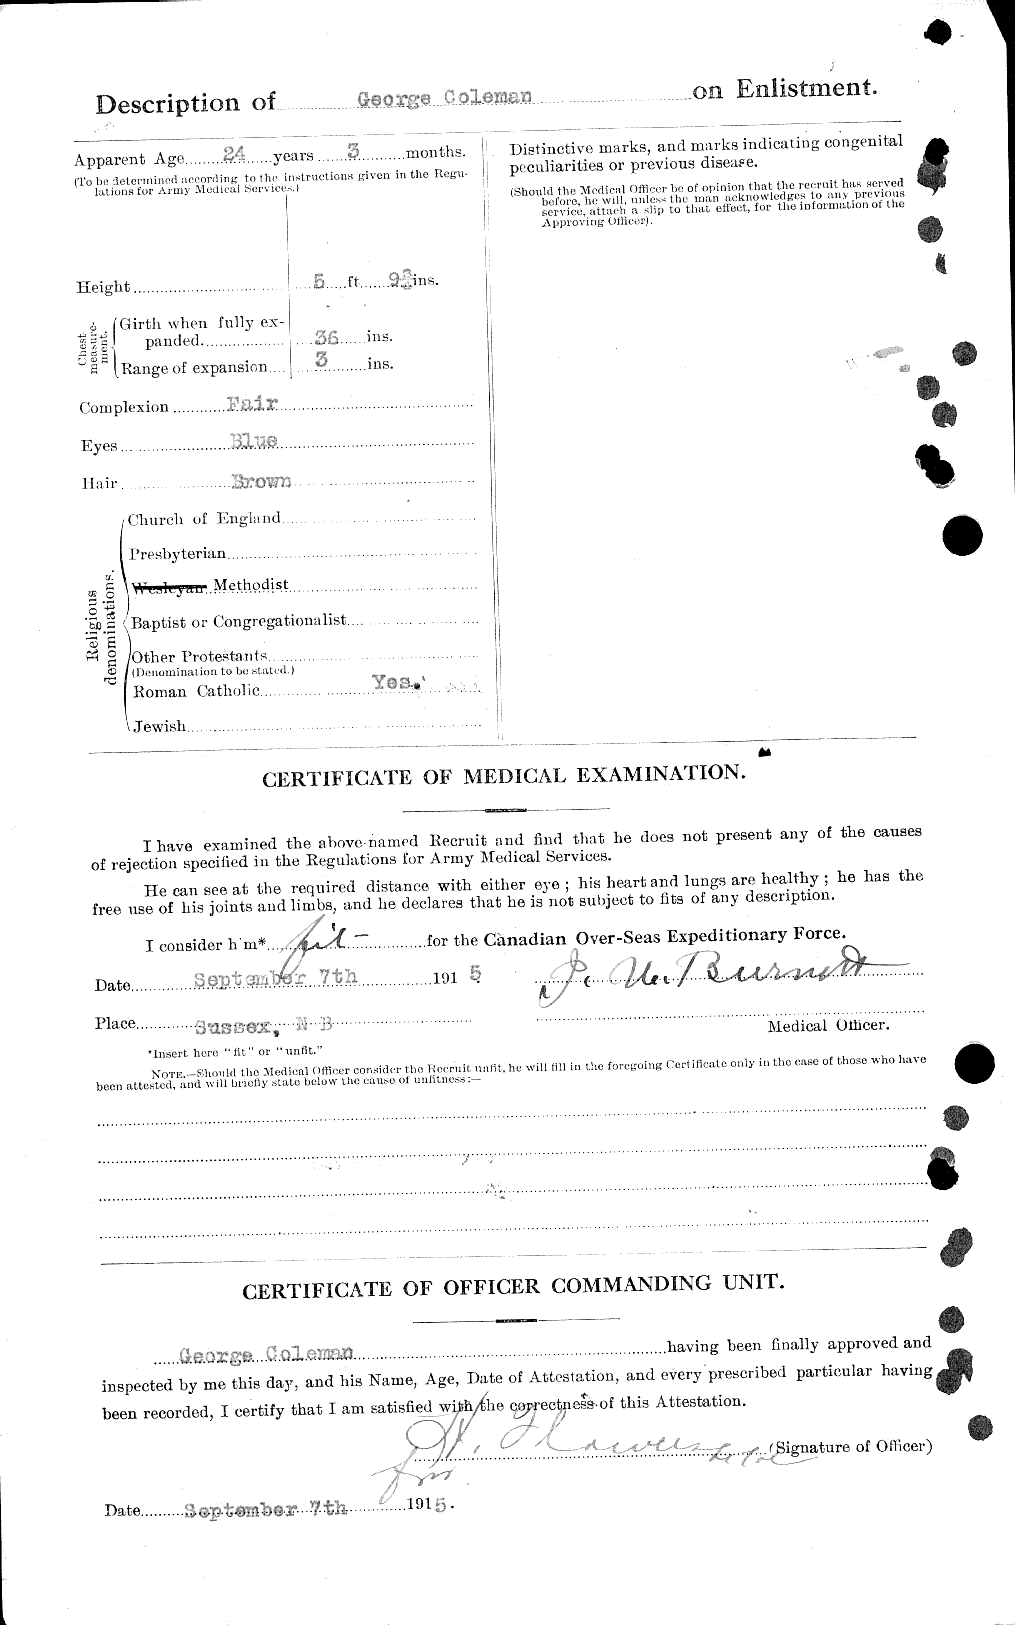 Personnel Records of the First World War - CEF 028153b